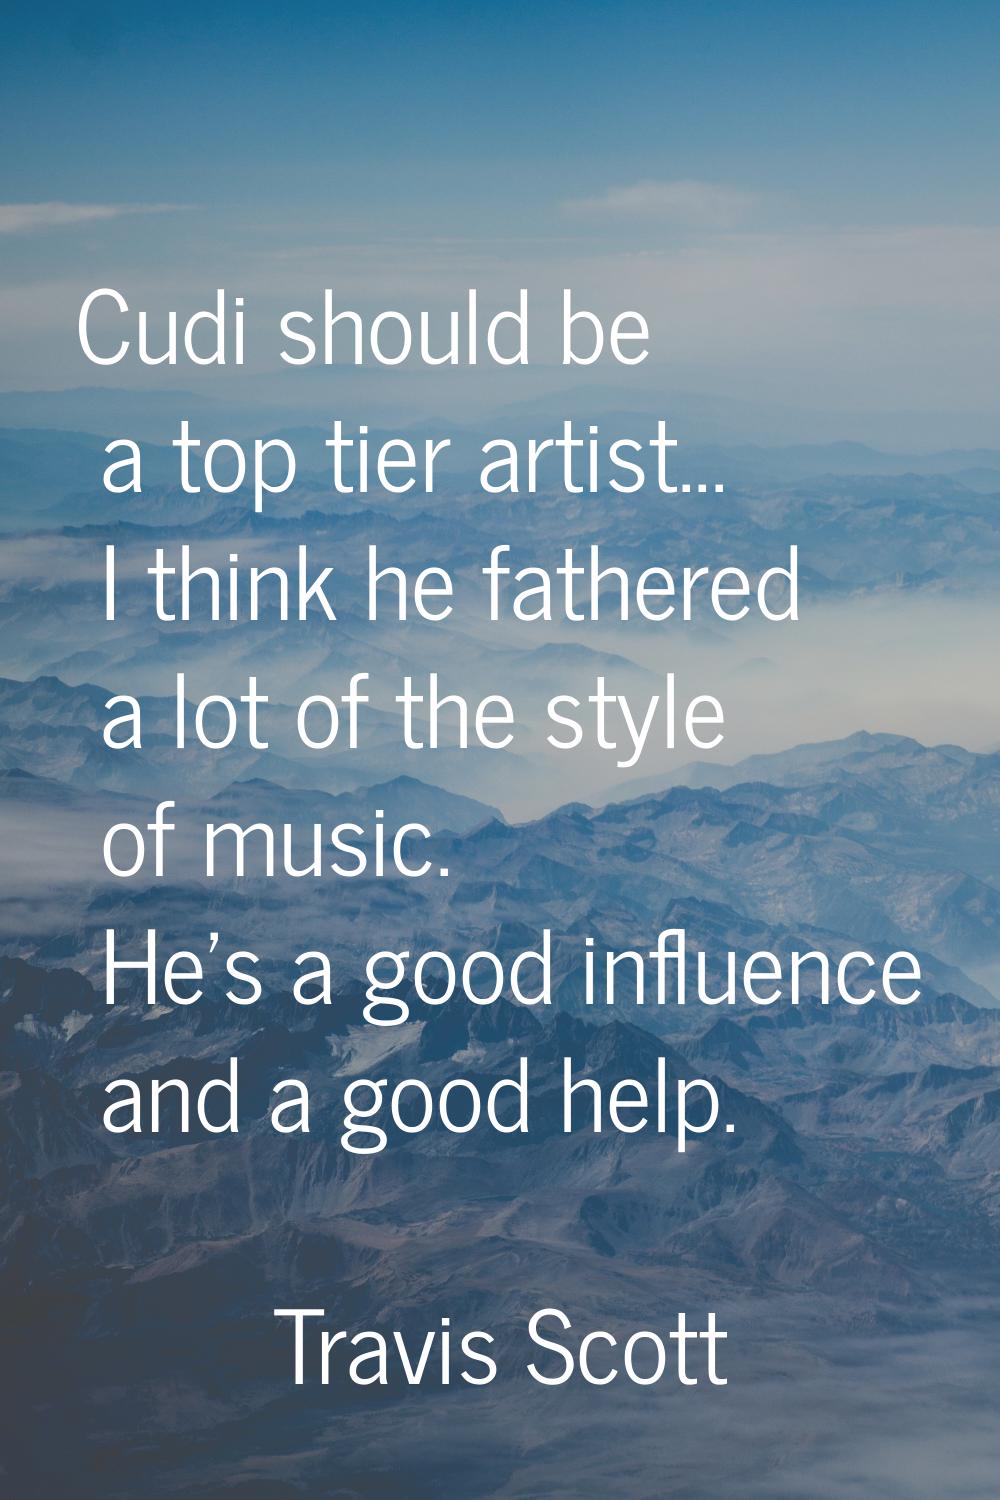 Cudi should be a top tier artist... I think he fathered a lot of the style of music. He's a good in